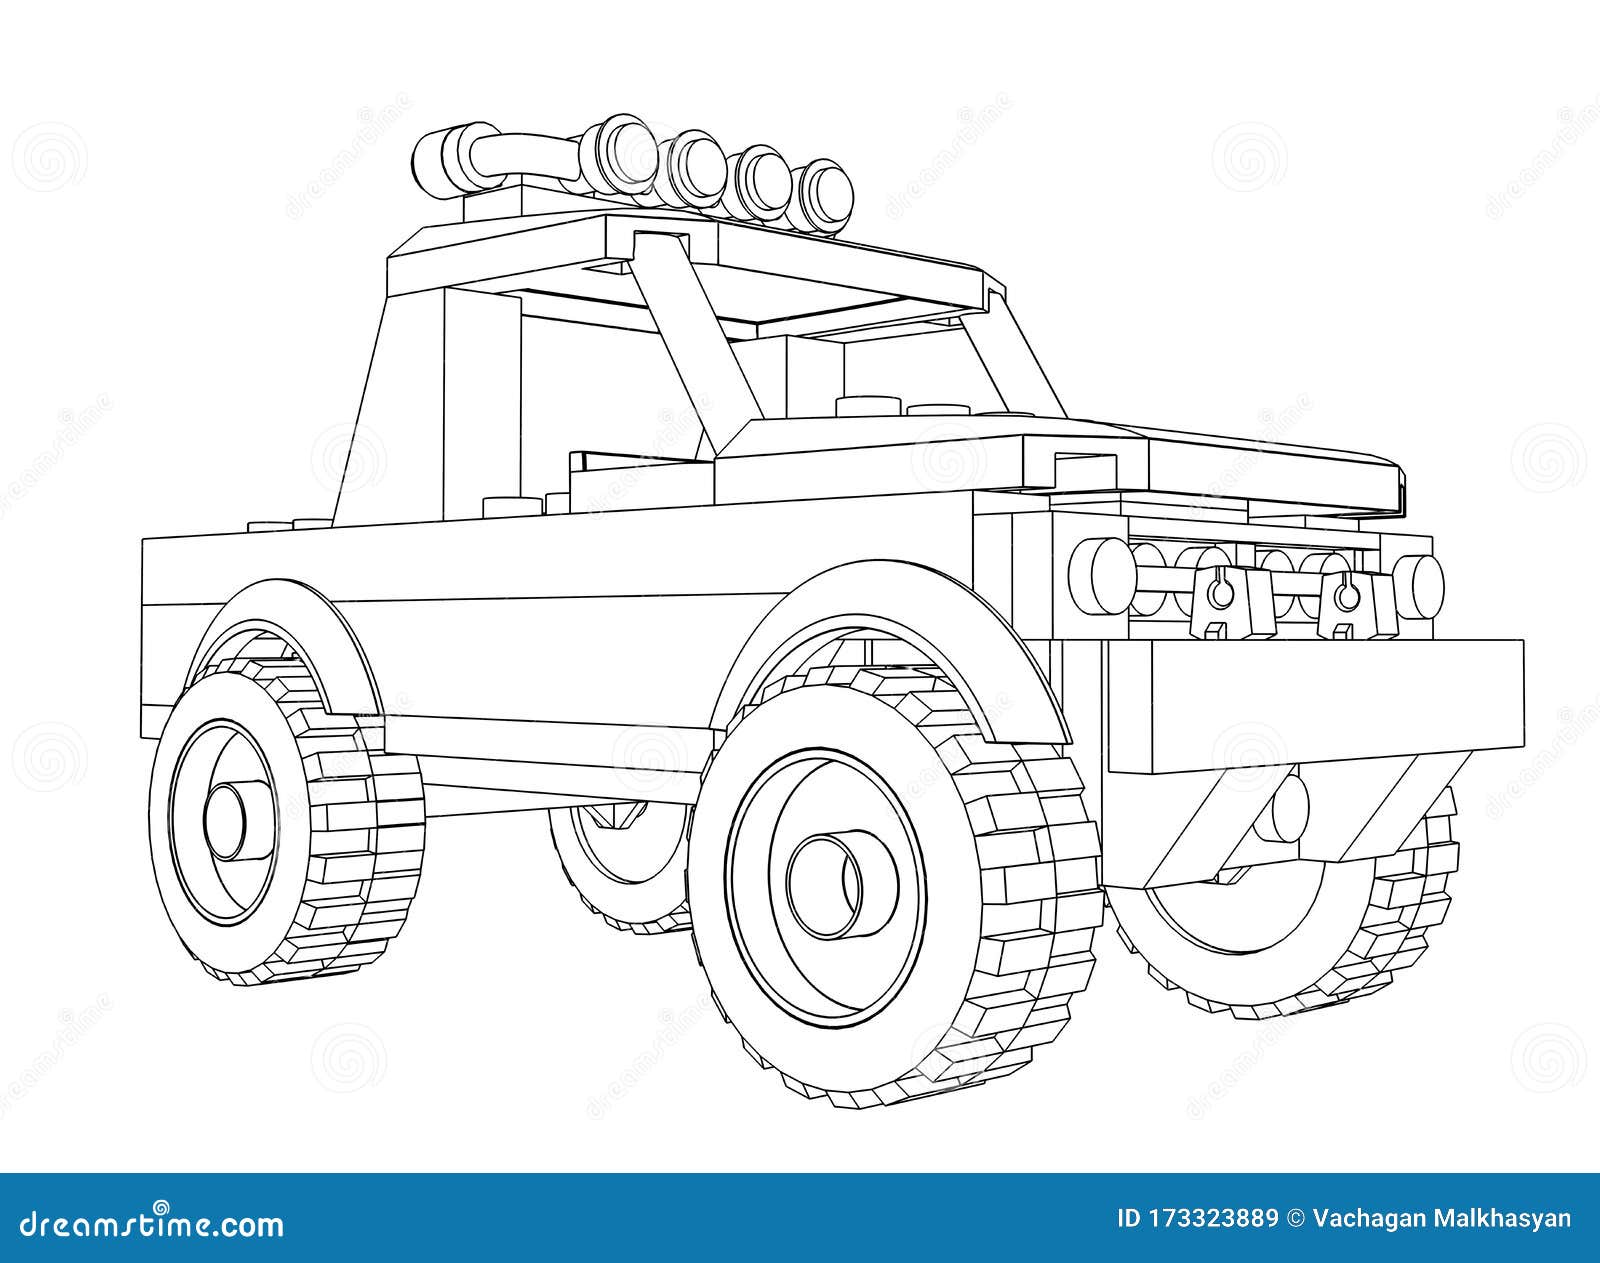 Toy jeep coloring picture car outline picture stock illustration